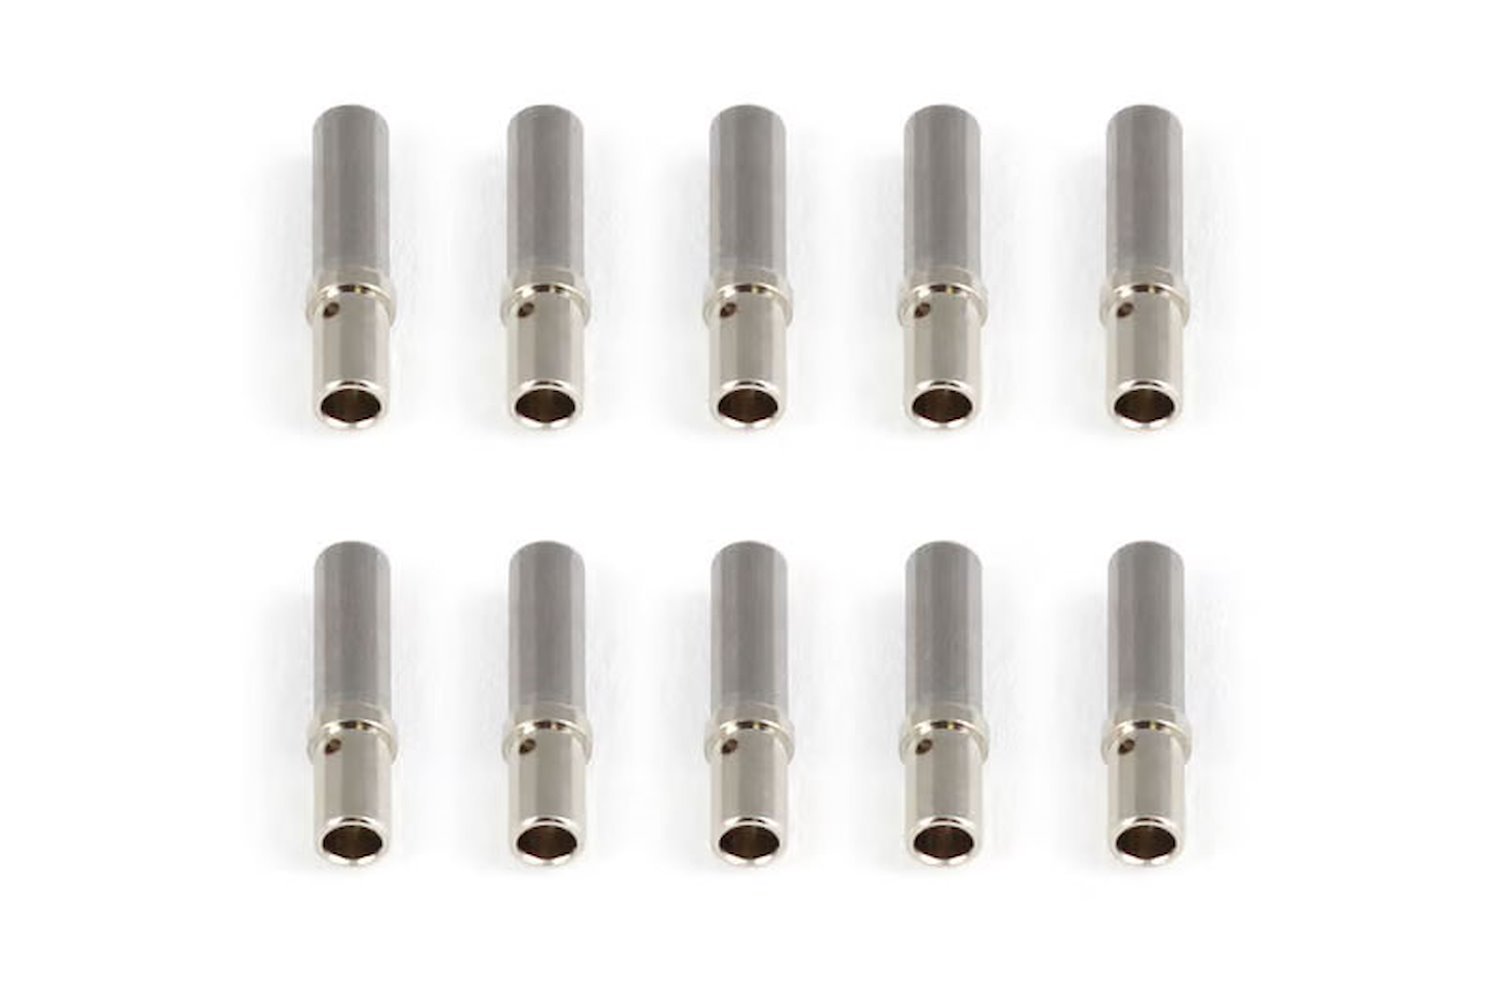 HT-031210 Pins Only, Female-Pins to Male Deutsch DTP Connectors